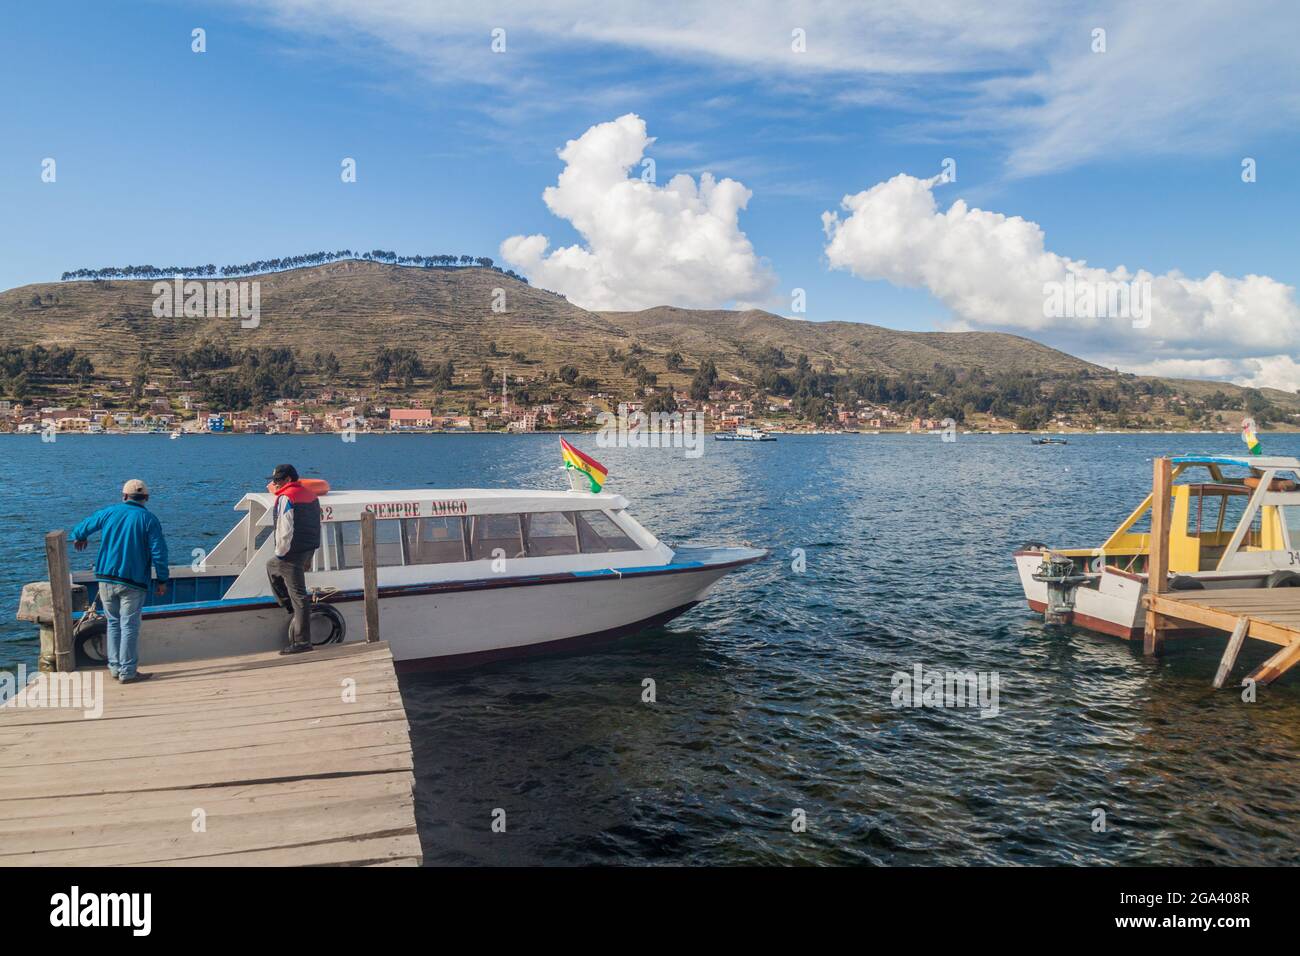 TIQUINA STRAIT, BOLIVIA - MAY 11, 2015: Ferry boats are prepared for transport of vehicles across the Tiquina strait at Titicaca lake, Bolivia Stock Photo